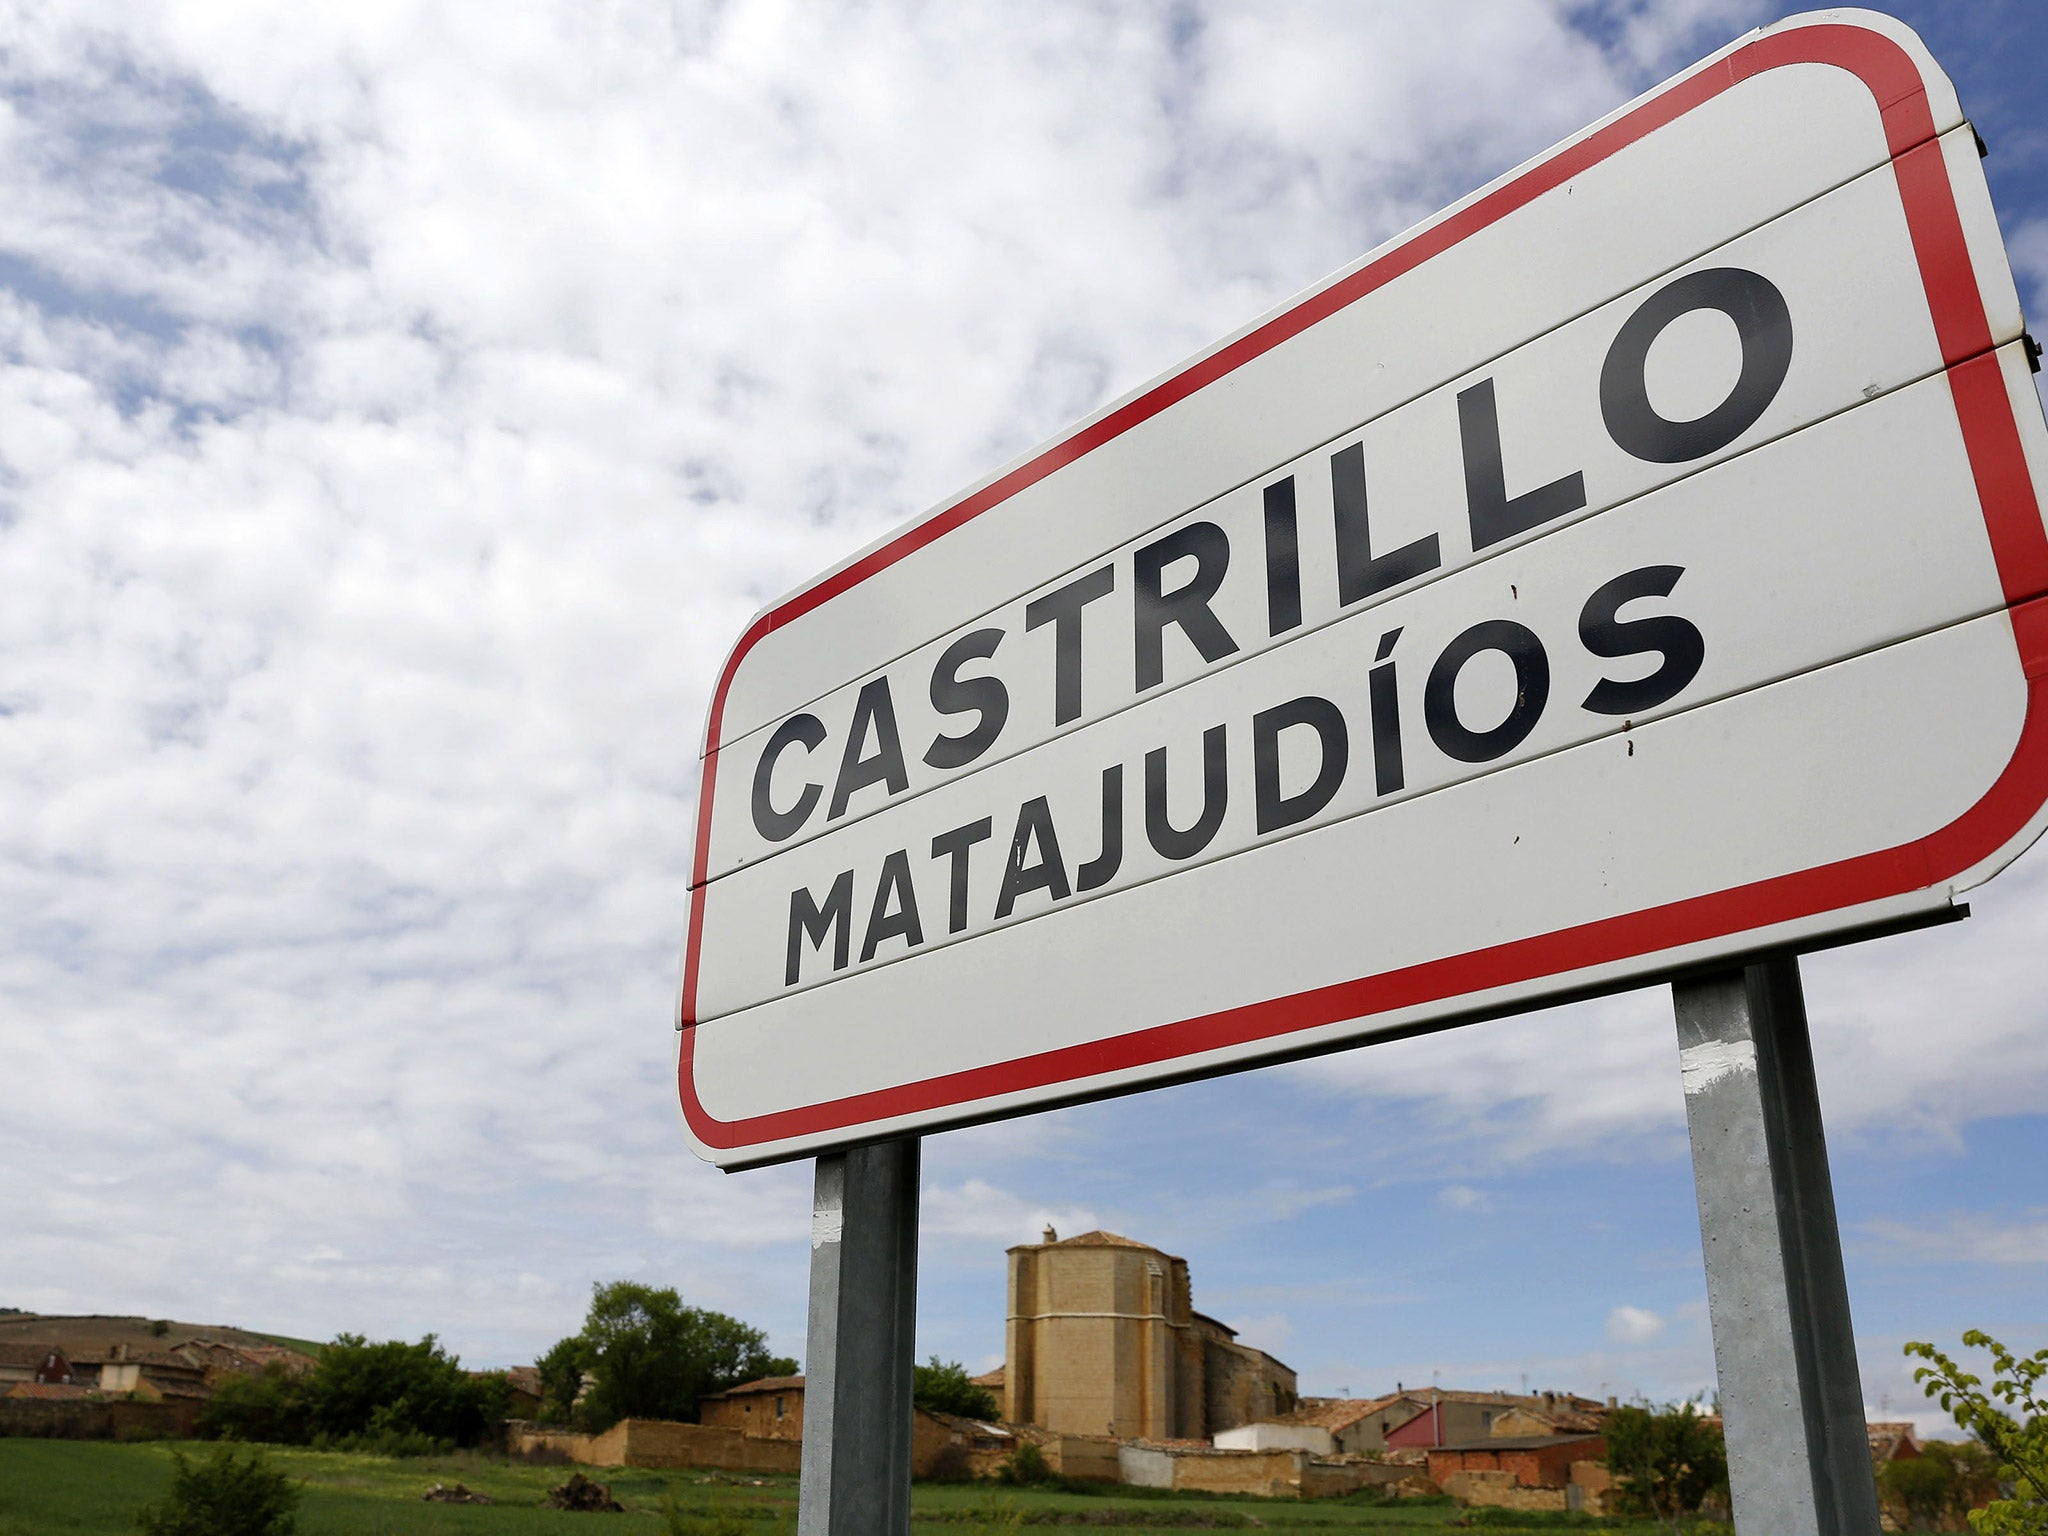 The long awaited renaming has been supported by the regional government of Castilla y Leon and bolstered by Mayor Lorenzo Rodriguez